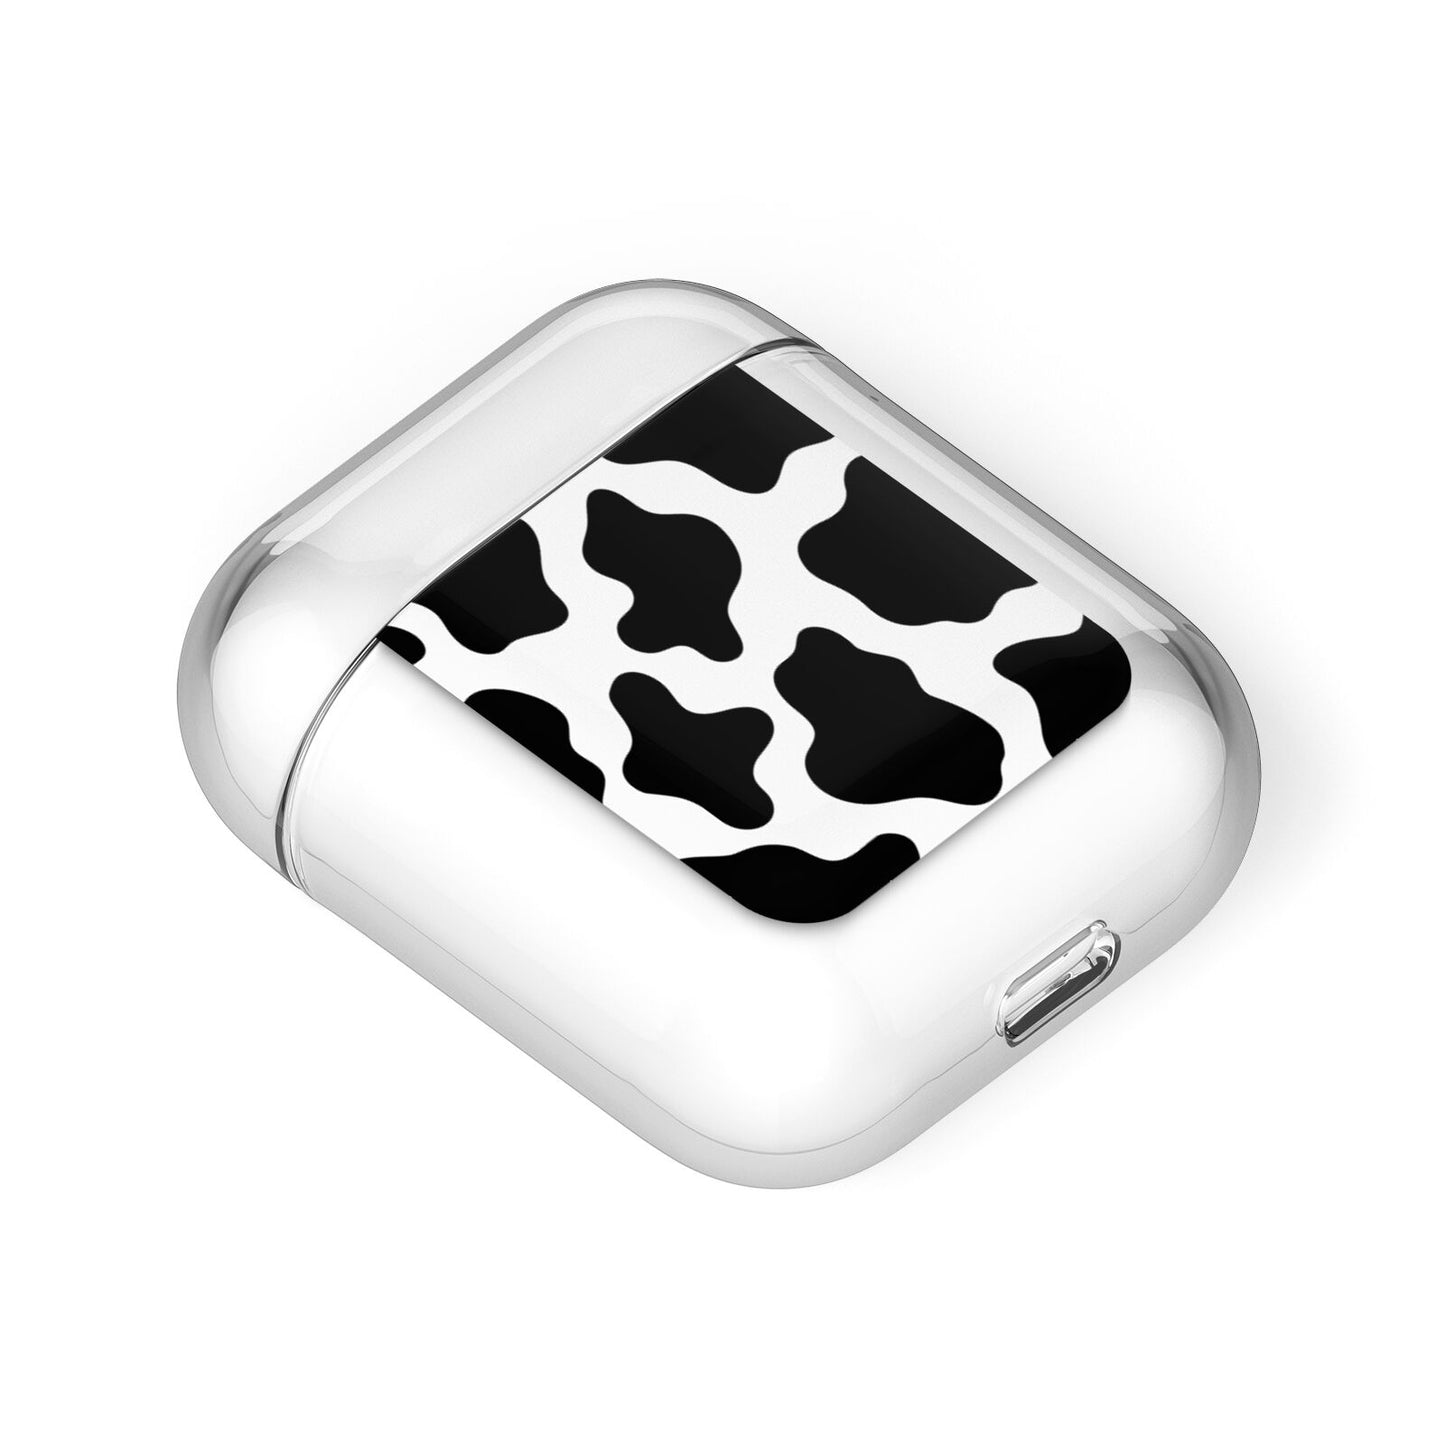 Cow Print AirPods Case Laid Flat